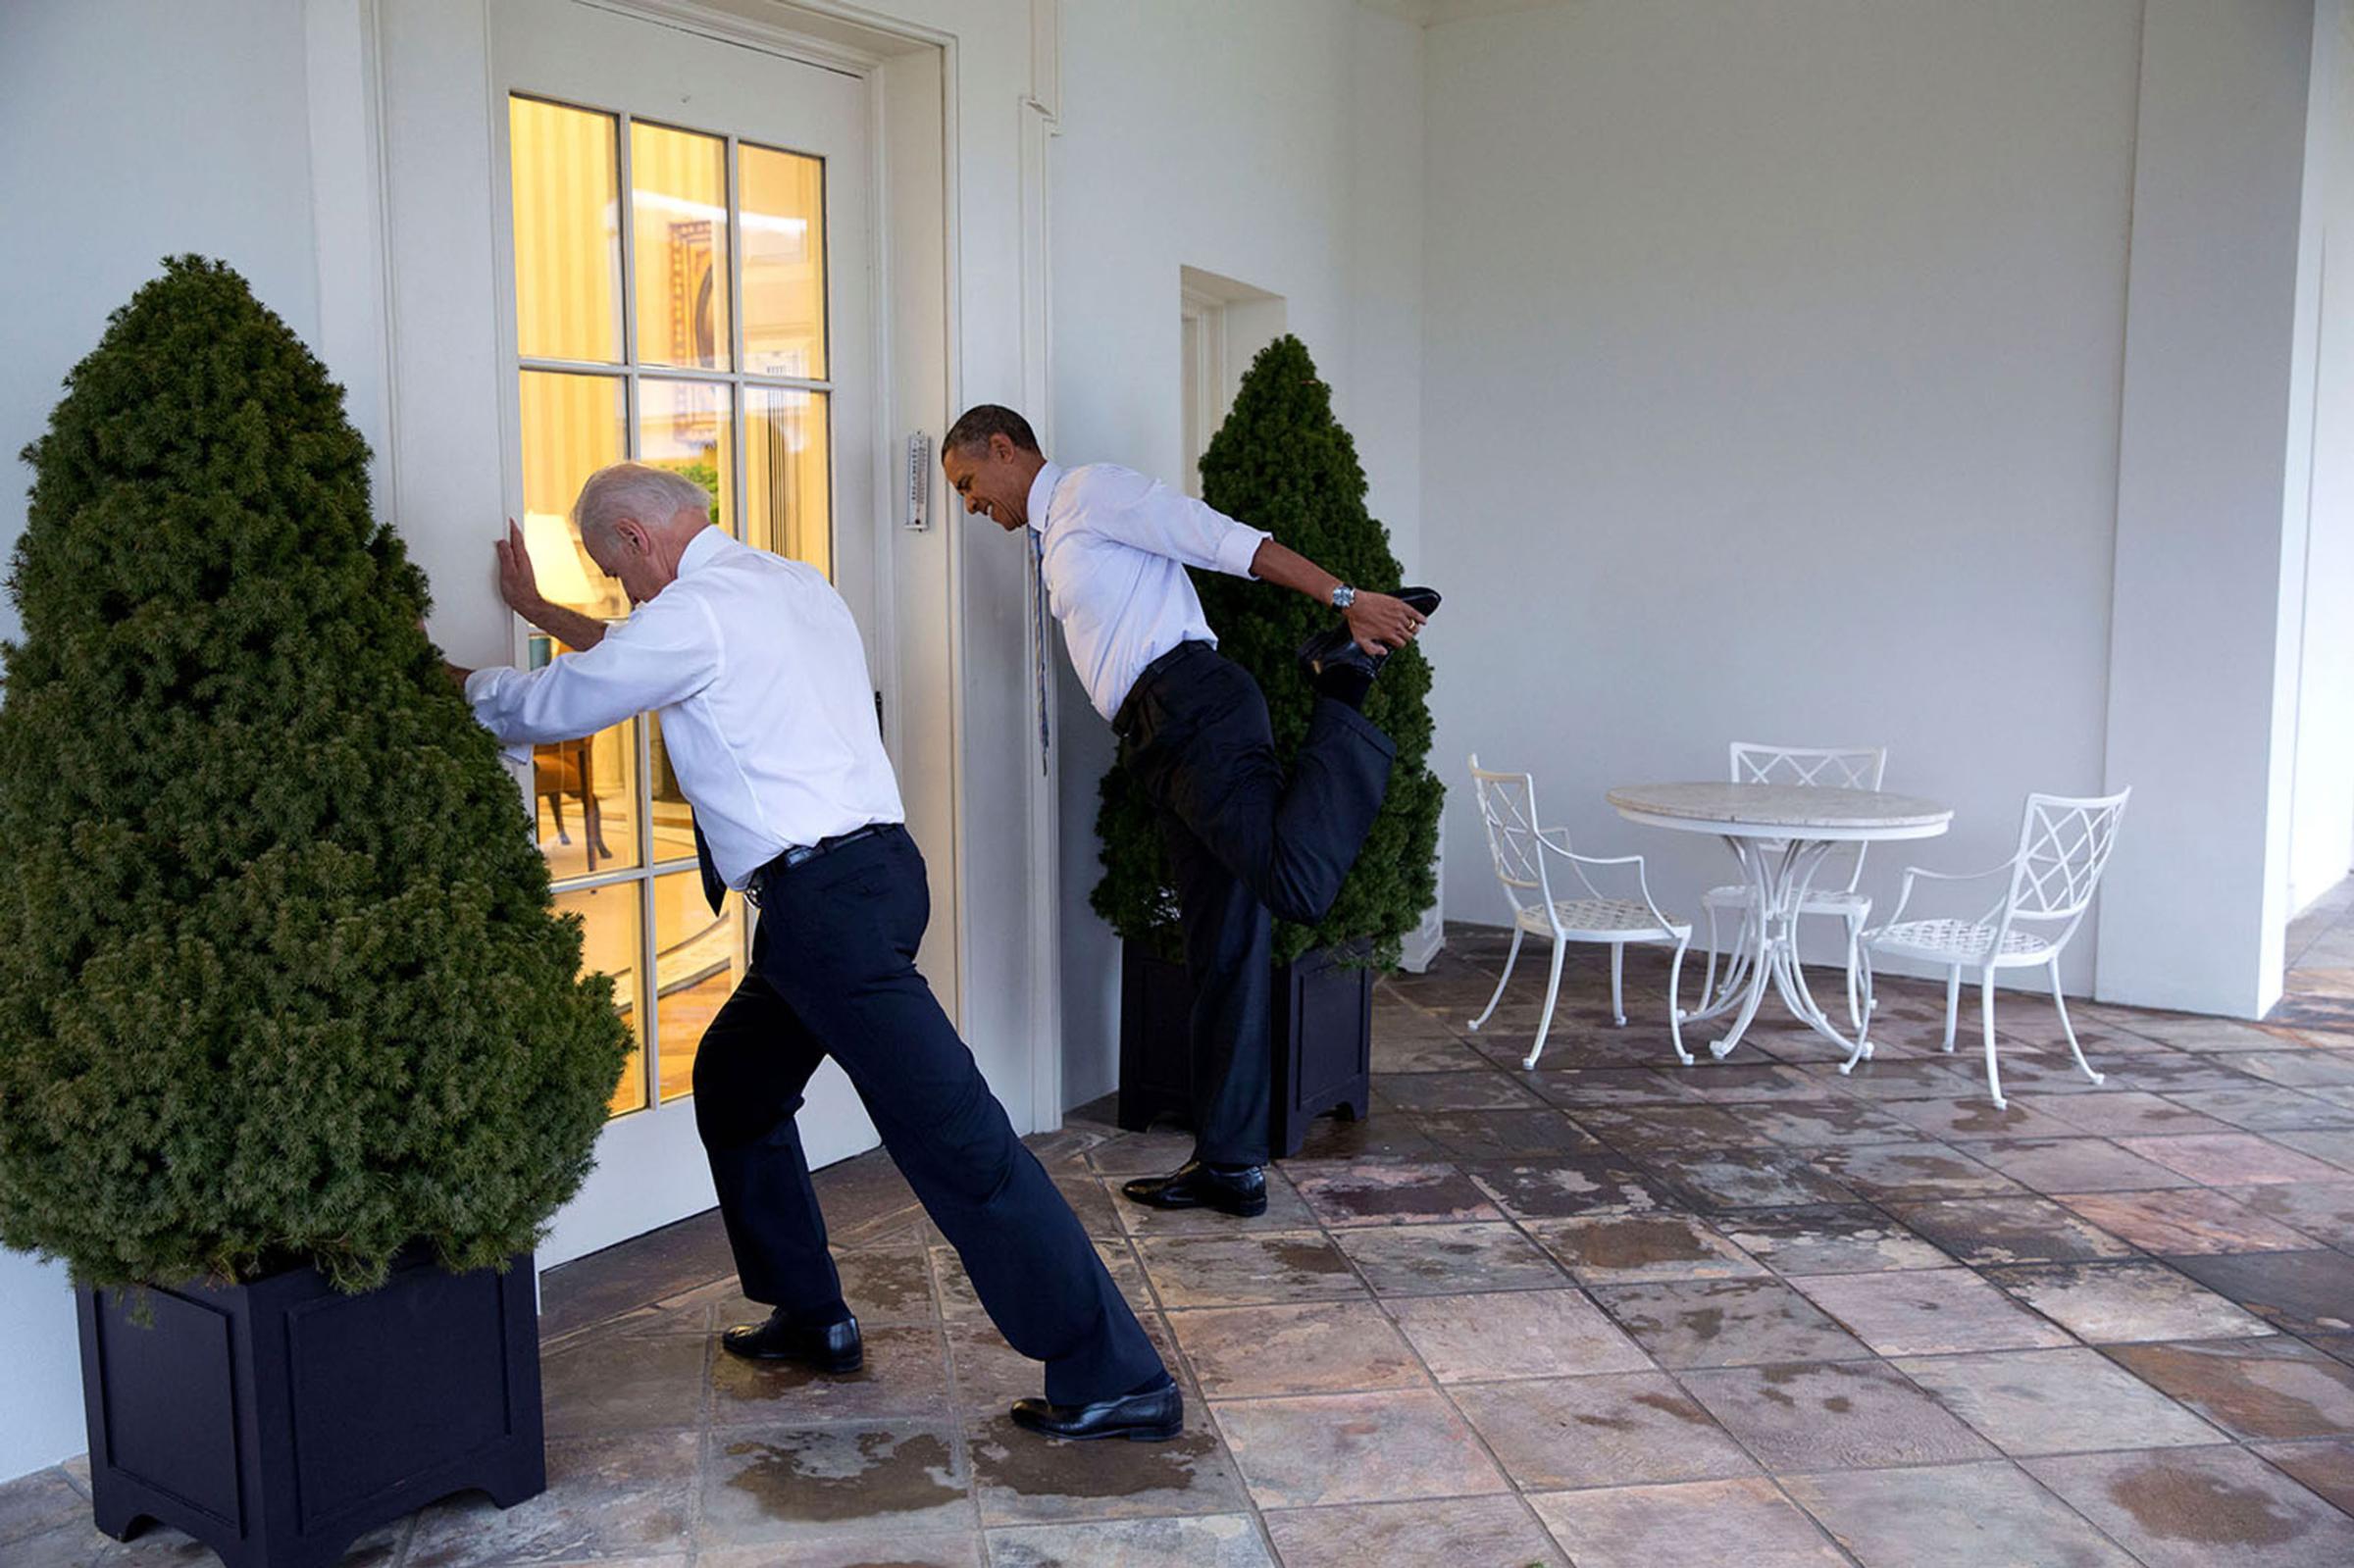 President Barack Obama and Vice President Joe Biden participate in a "Let's Move!" video taping on the Colonnade of the White House, Feb. 21, 2014.